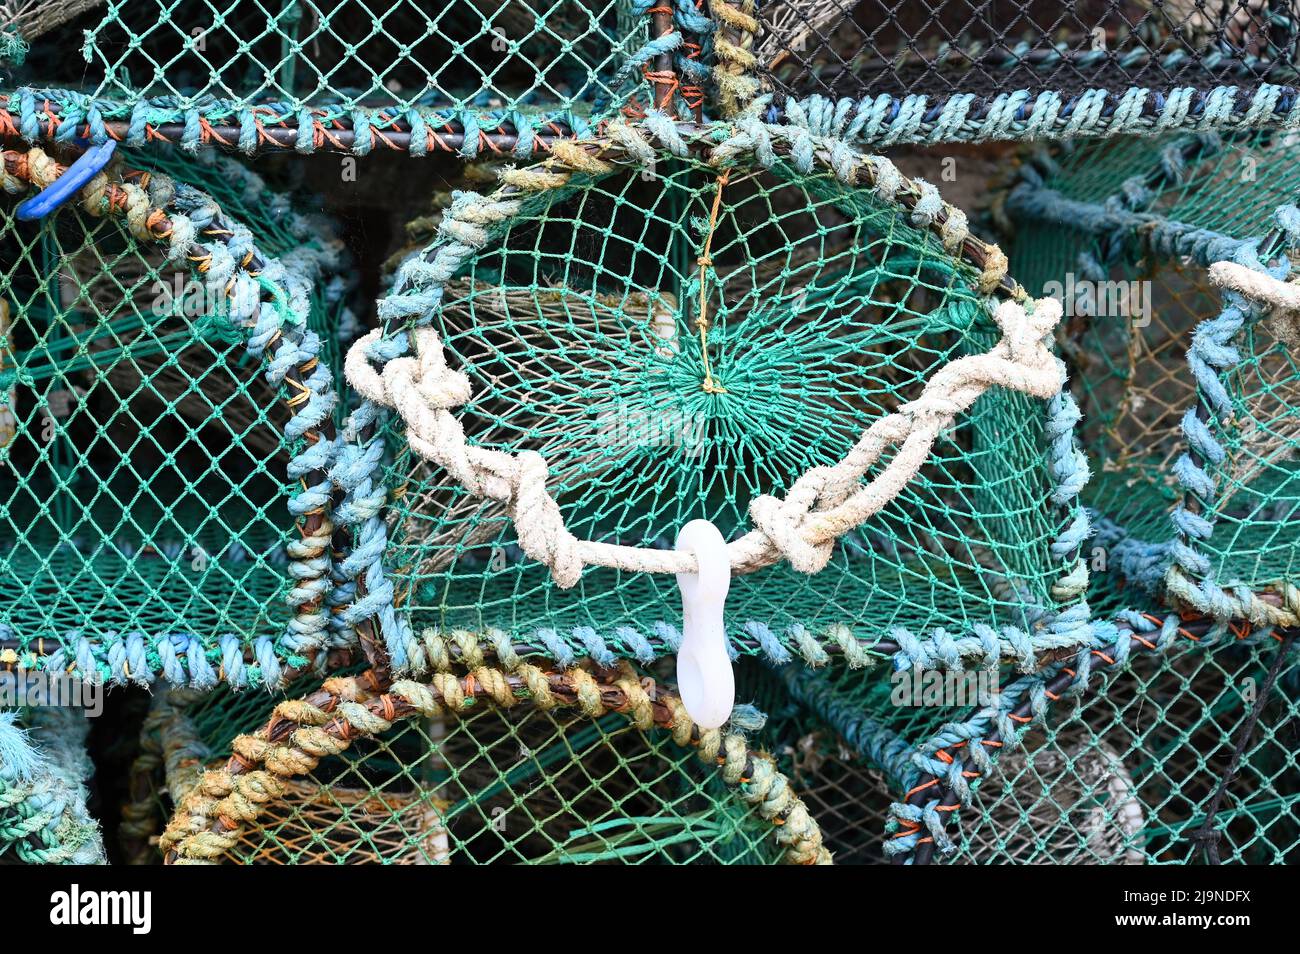 Fish trap for lobster and crab. Abstract pattern, Devon, Great Britain. Blue Lobster pots. Stock Photo